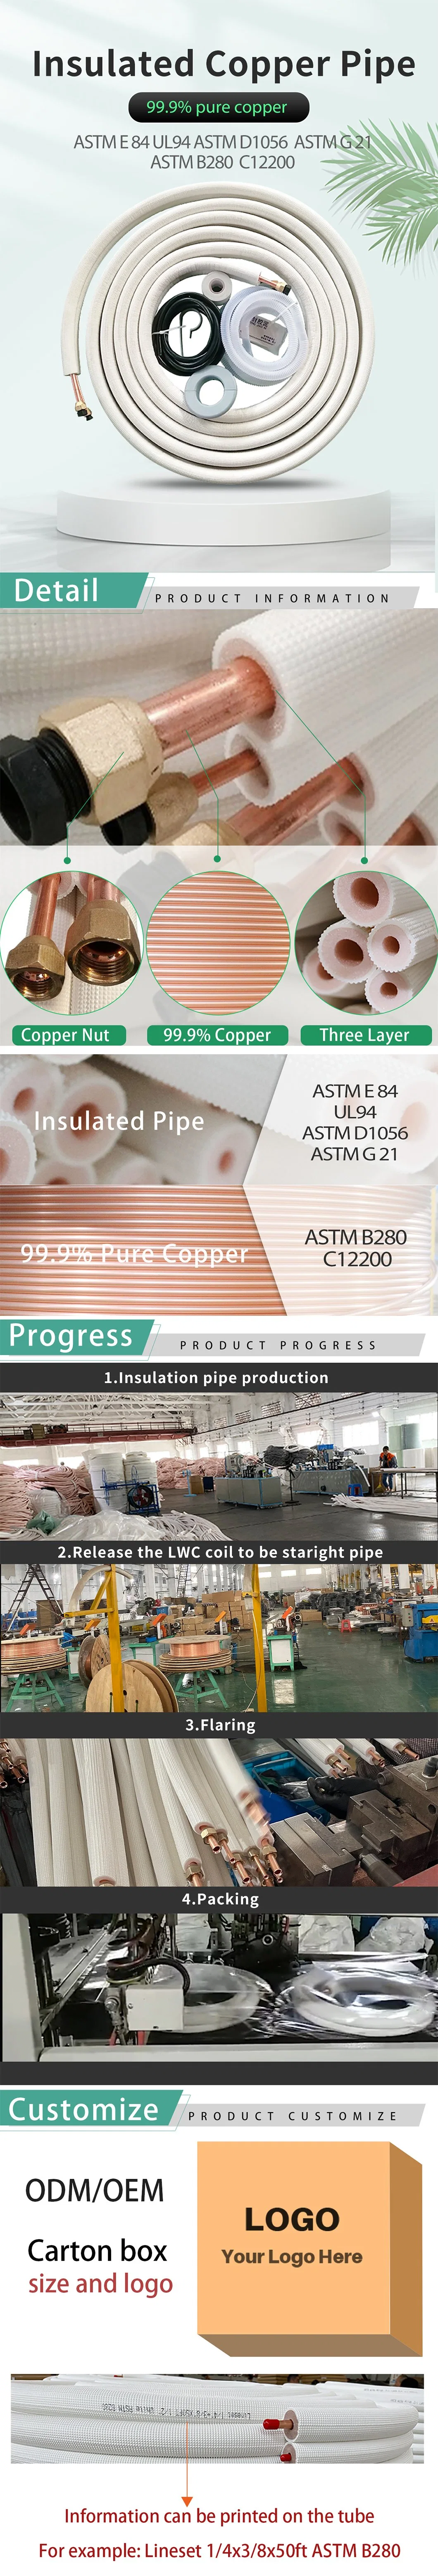 White PE Insulation Copper Pipe Installation Kit for Refrigeration